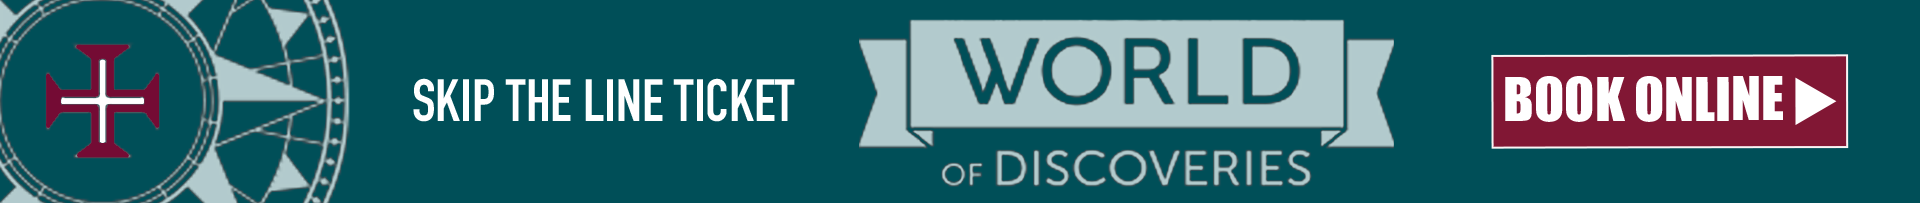 World of Discoveries - Skip the Line Ticket